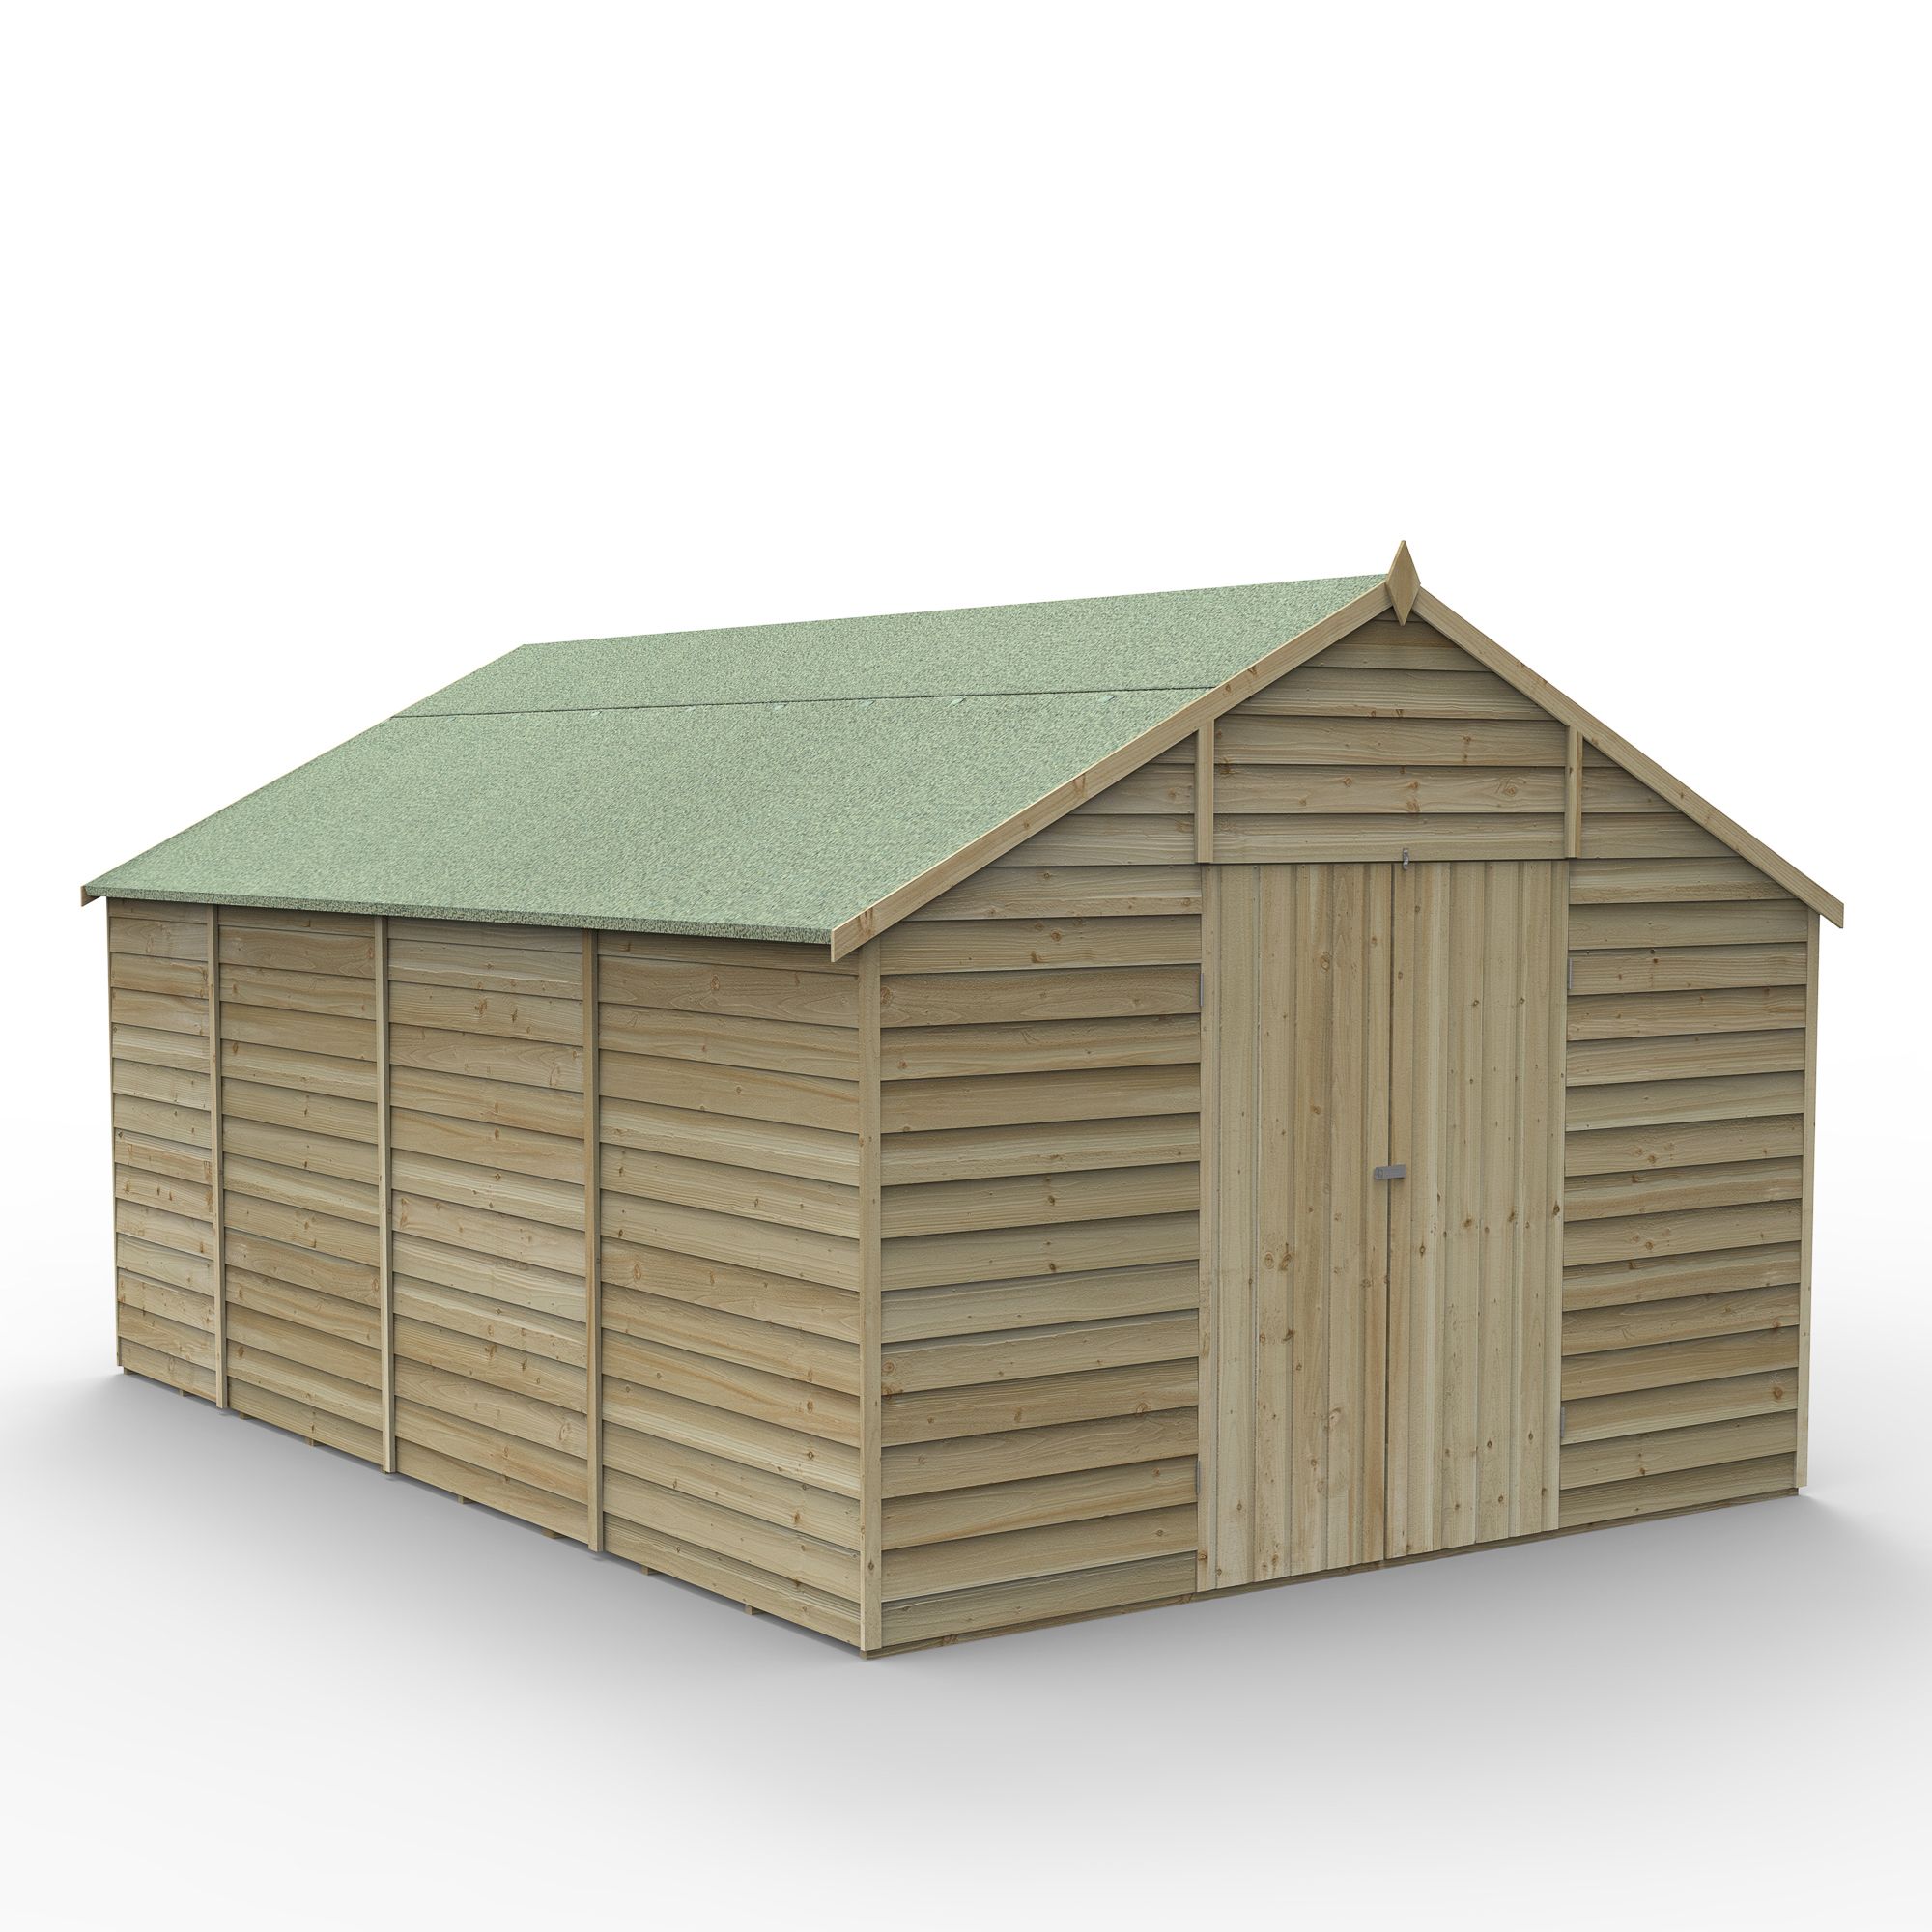 Forest Garden Overlap 10x15 ft Apex Wooden 2 door Shed with floor - Assembly service included